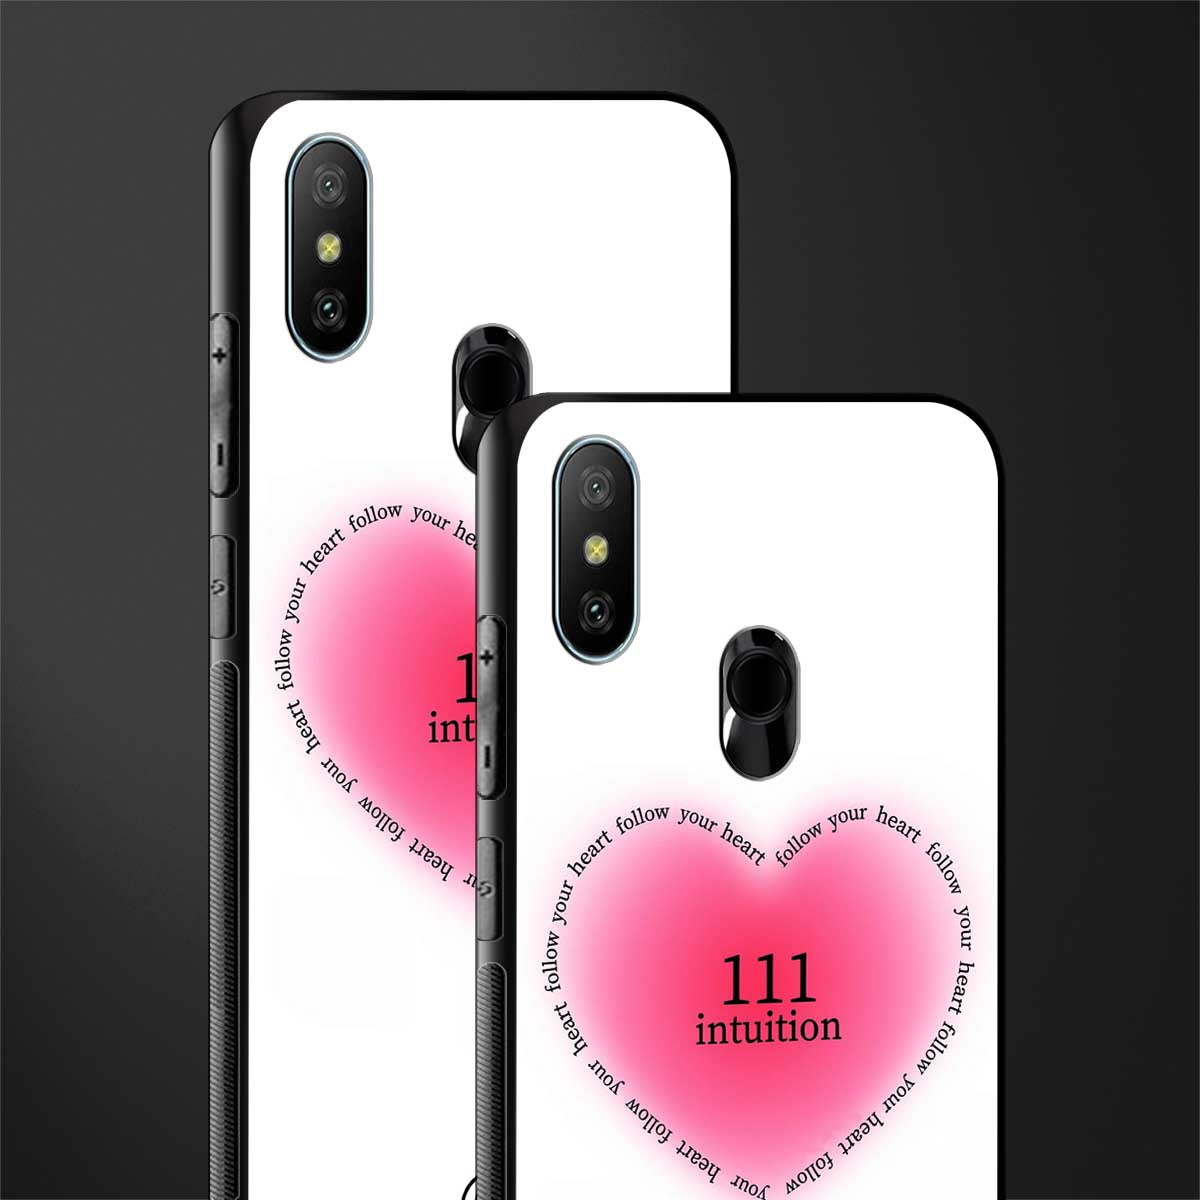 111 intuition glass case for redmi 6 pro image-2